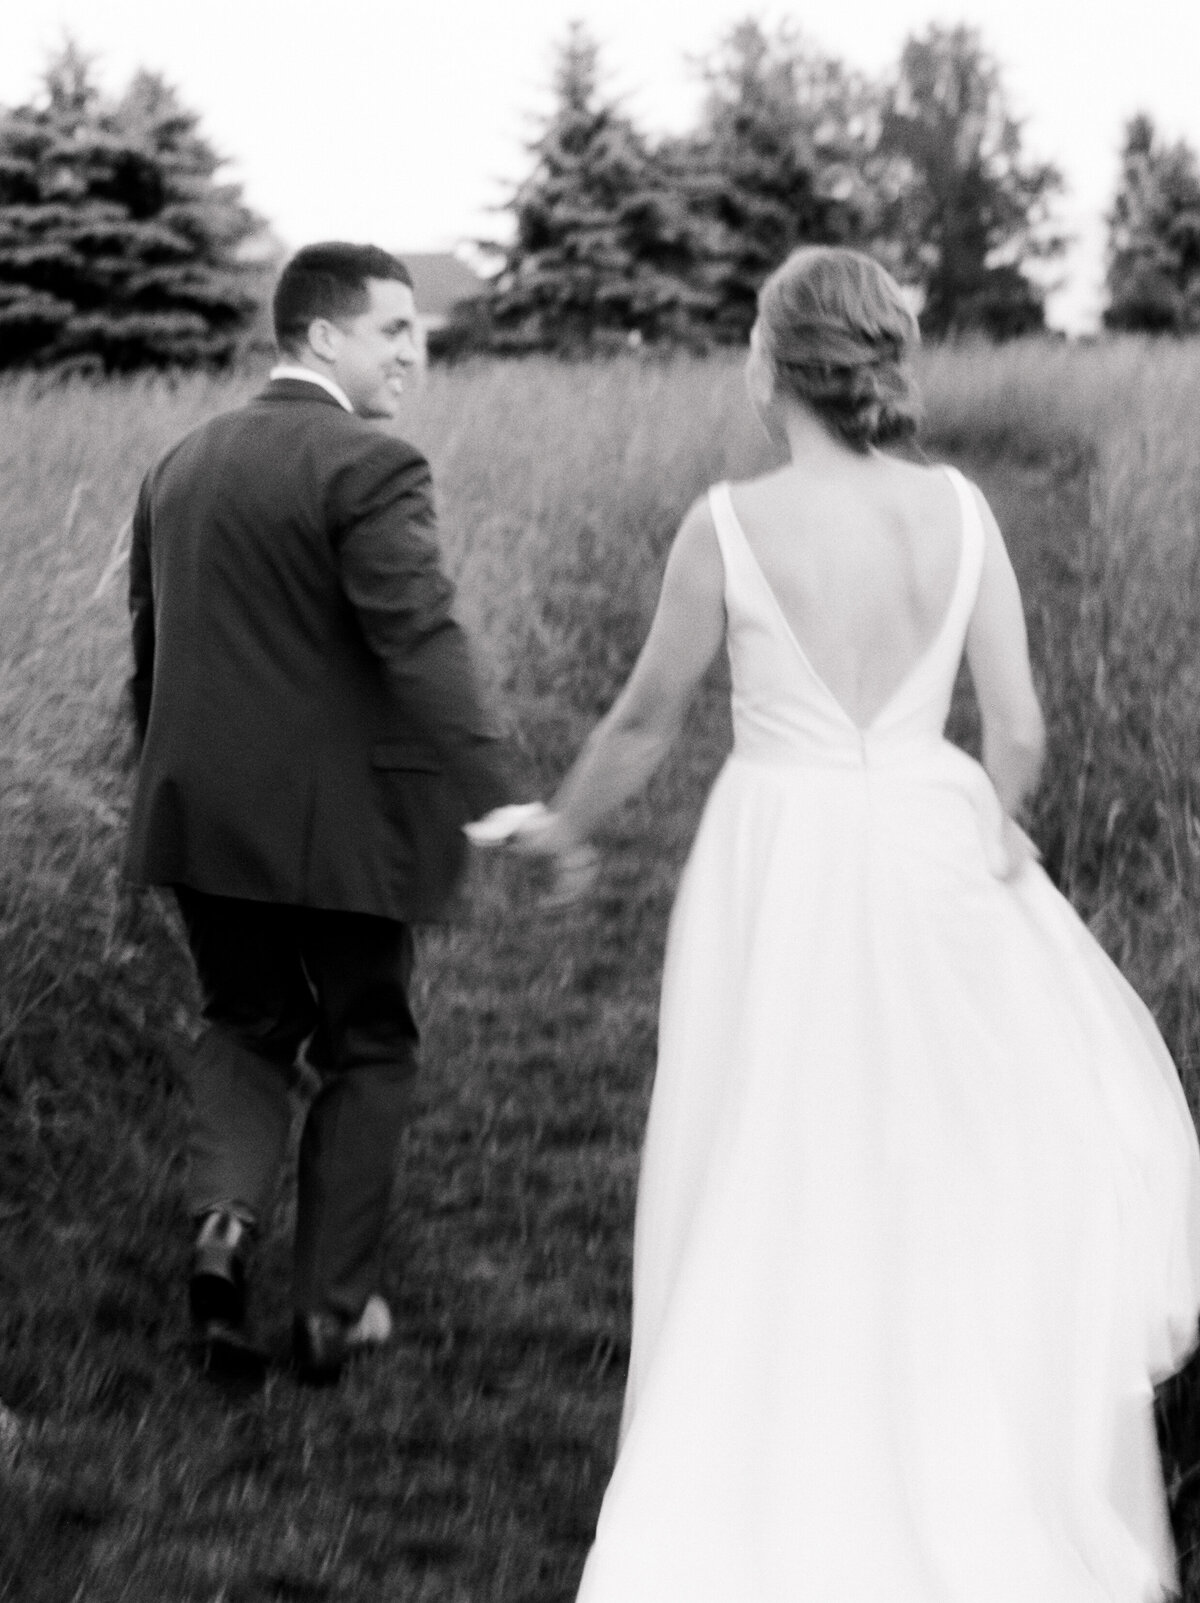 Black and white photo of bride and groom holding hands and walking through a grassy field